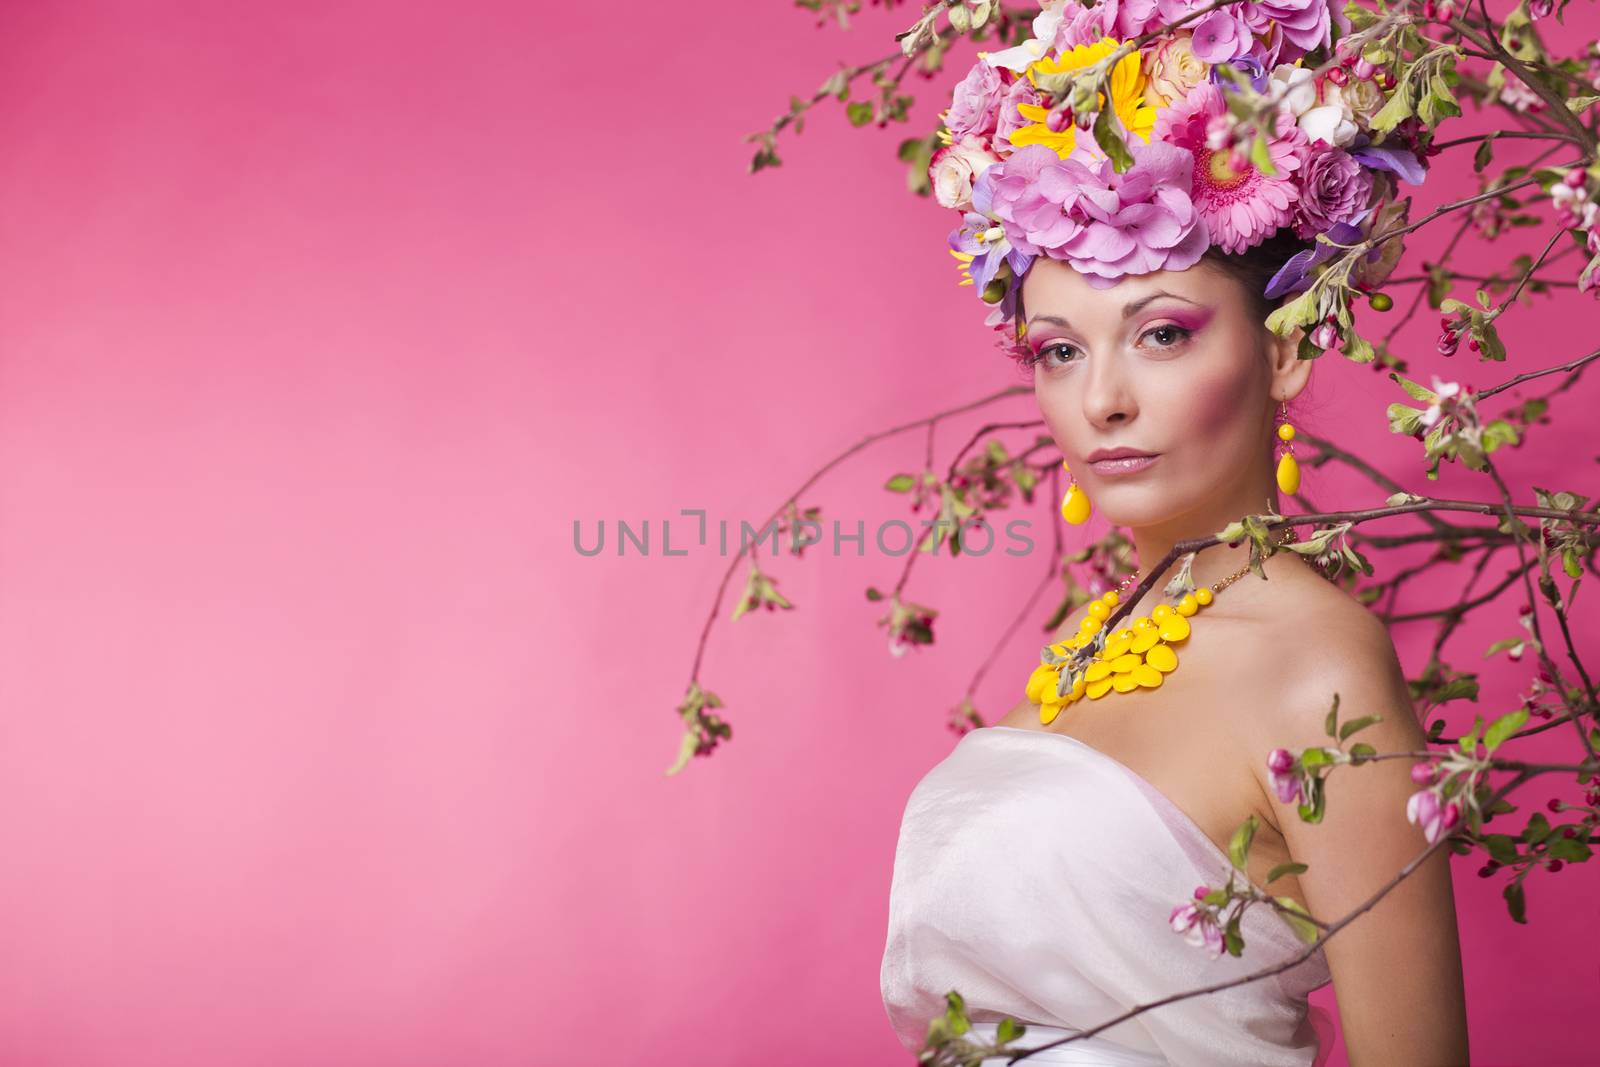 Fashion girl with flower hairstyle and pink background concept